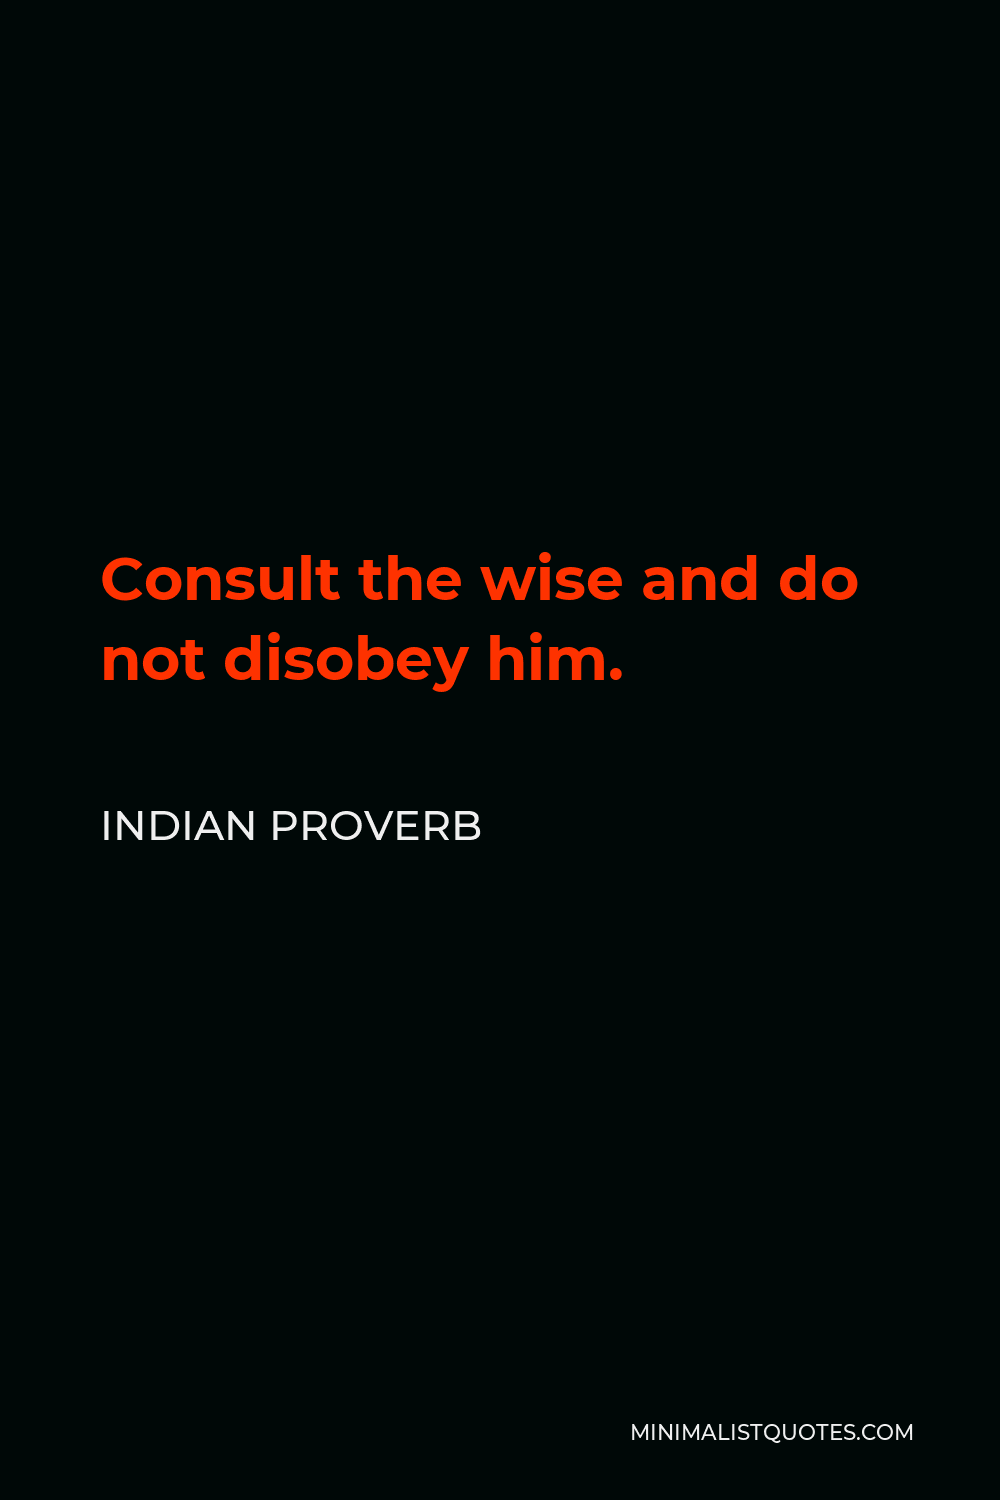 Indian Proverb Quote - Consult the wise and do not disobey him.